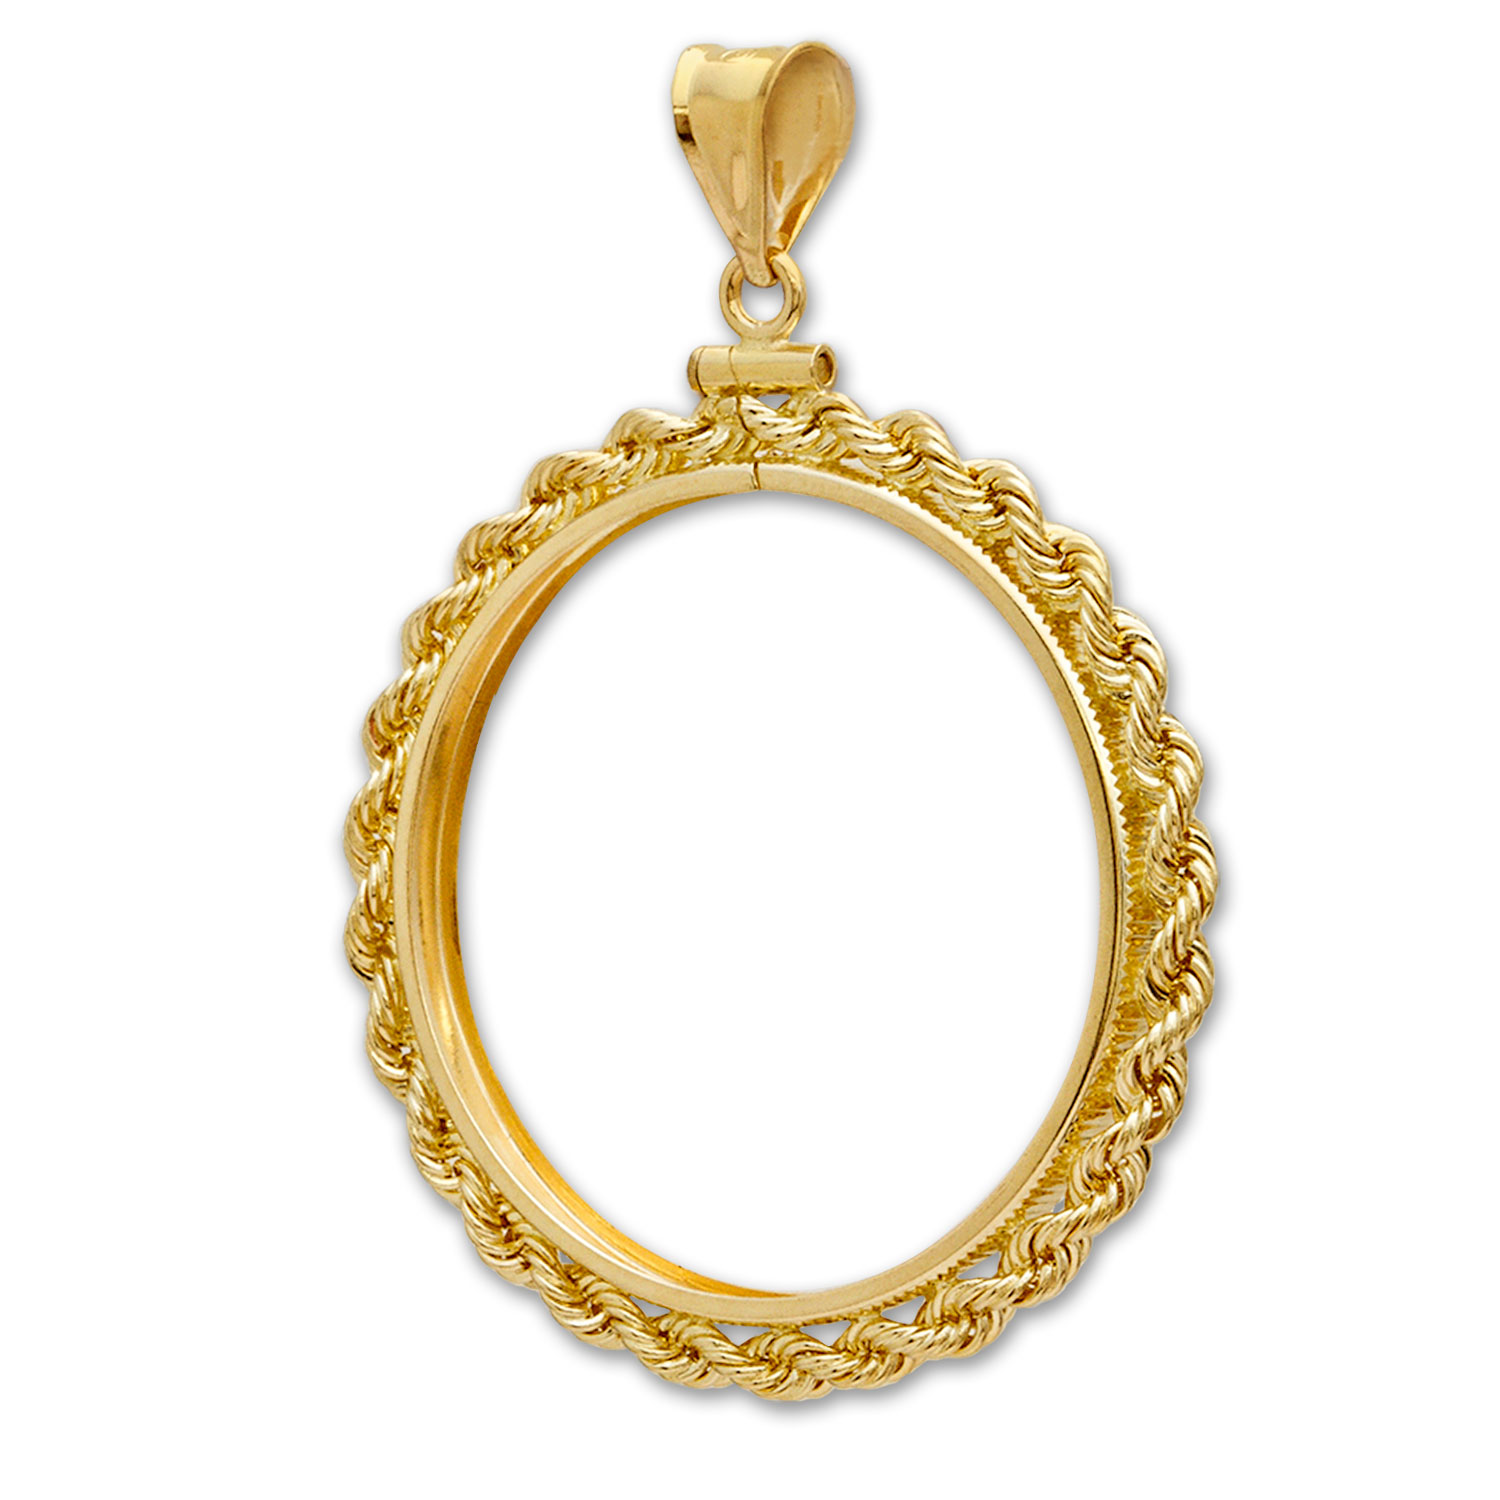 Buy 14K Gold Screw-Top Rope Polished Coin Bezel - 32.7 mm